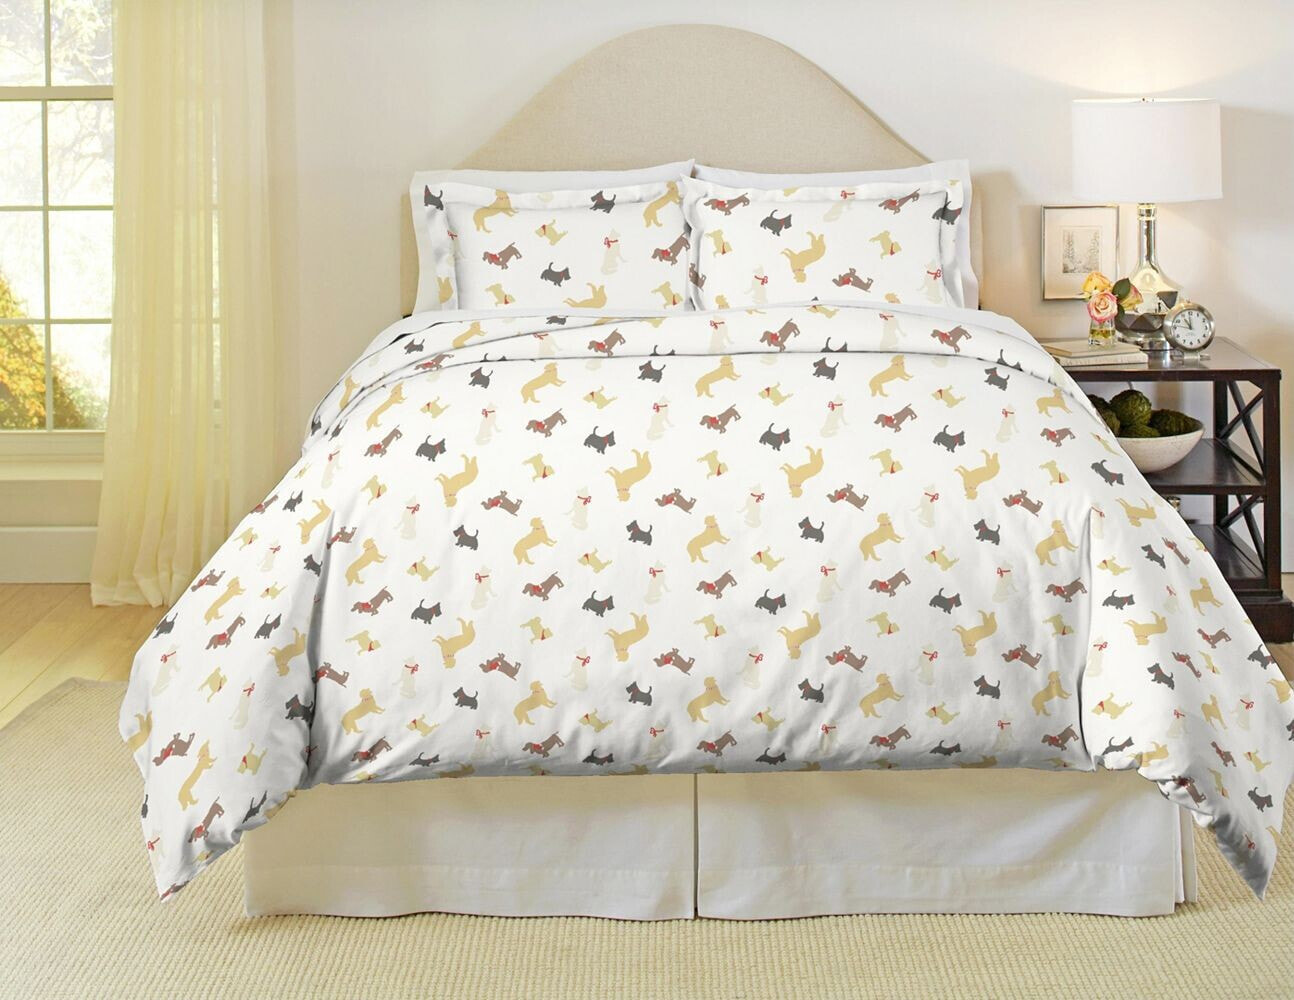 Pointehaven winter Dogs Print Heavy Weight Cotton Flannel Duvet Cover Set, Full/Queen